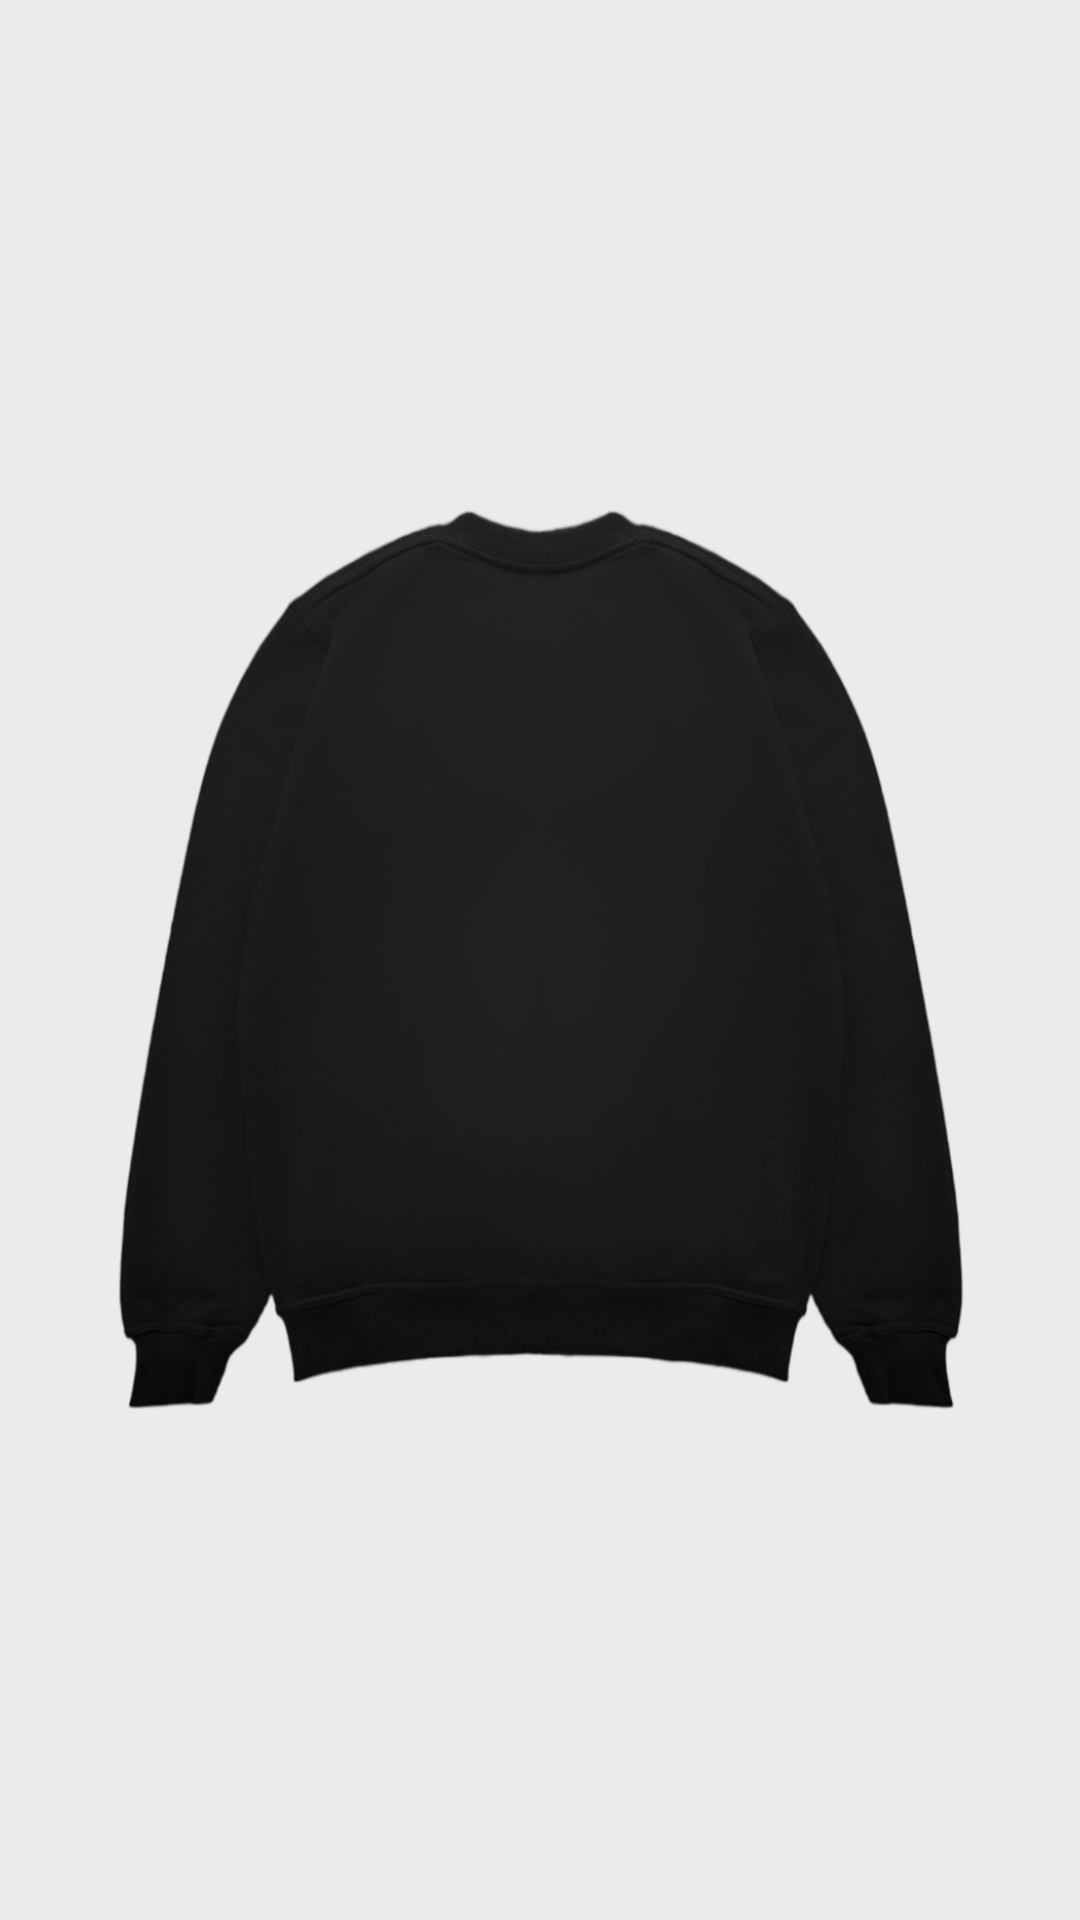 The Spark Inspiration Sweater - Attractedtoblack